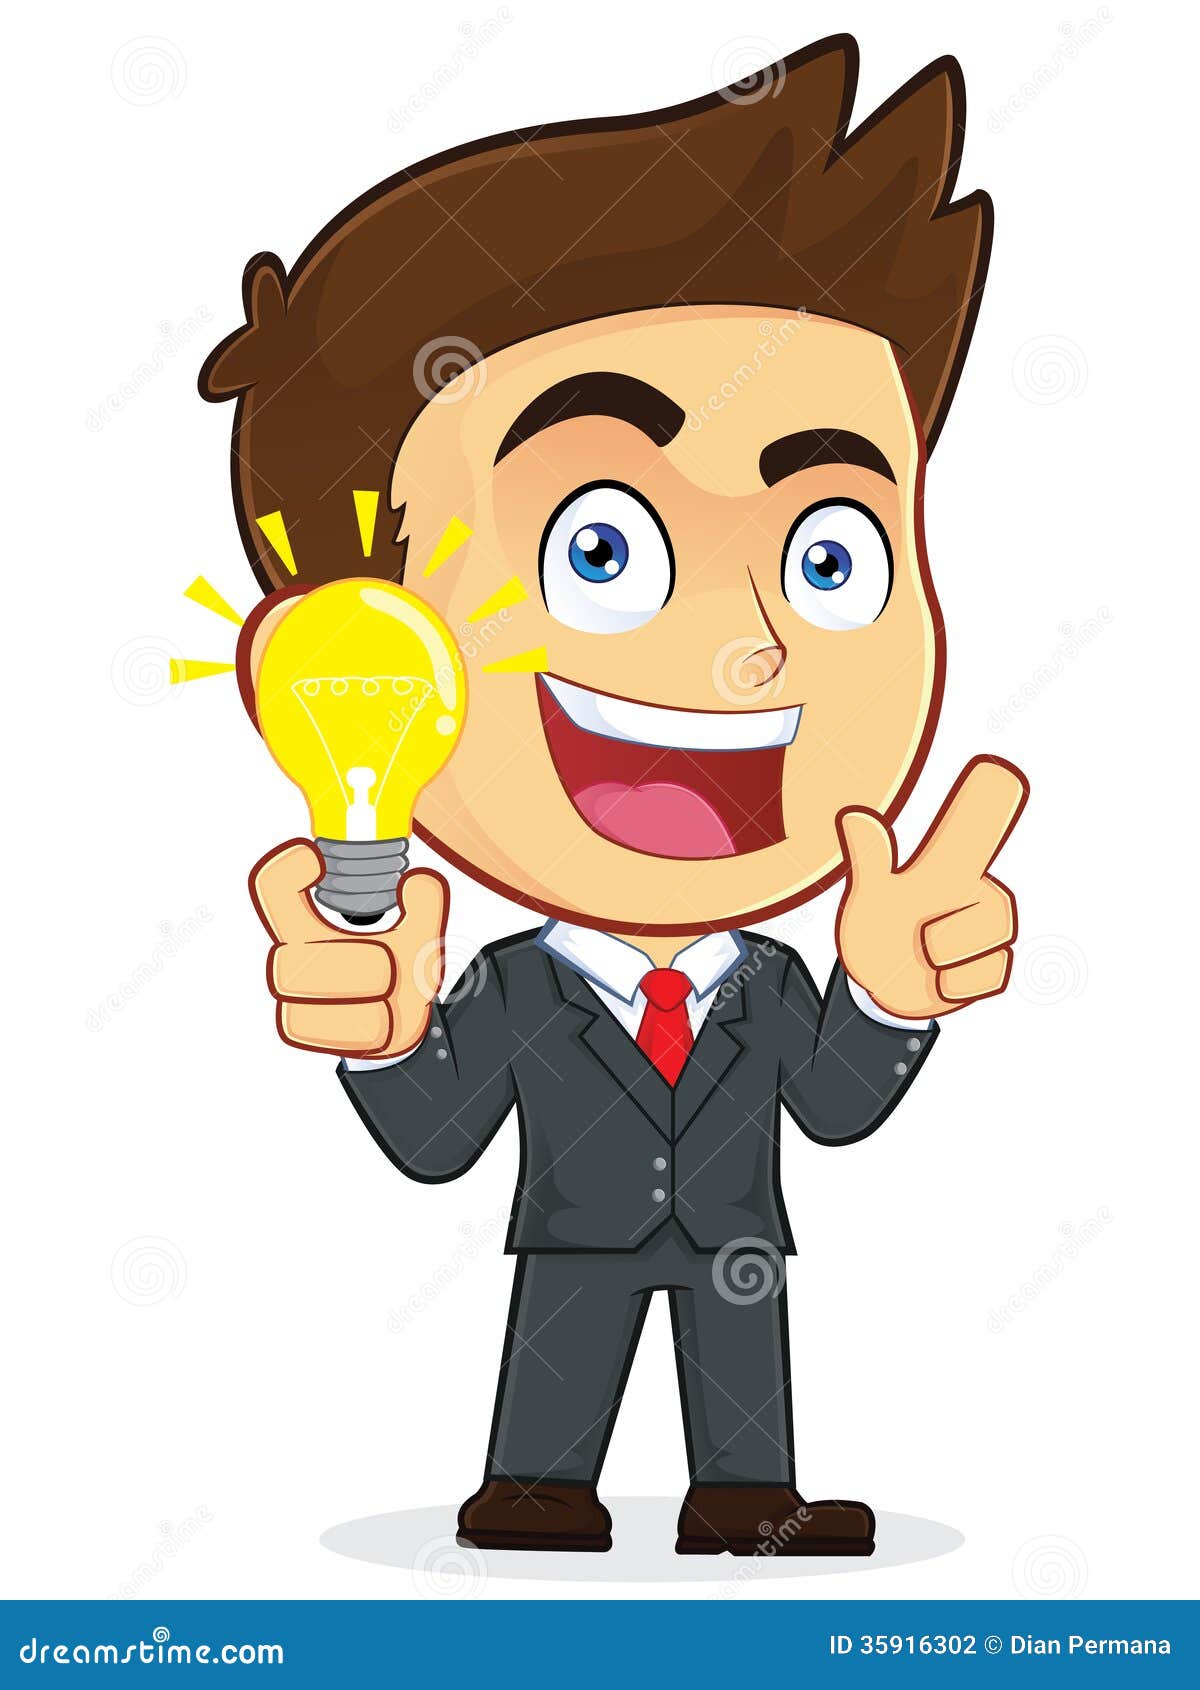 clipart of businessman thinking - photo #31